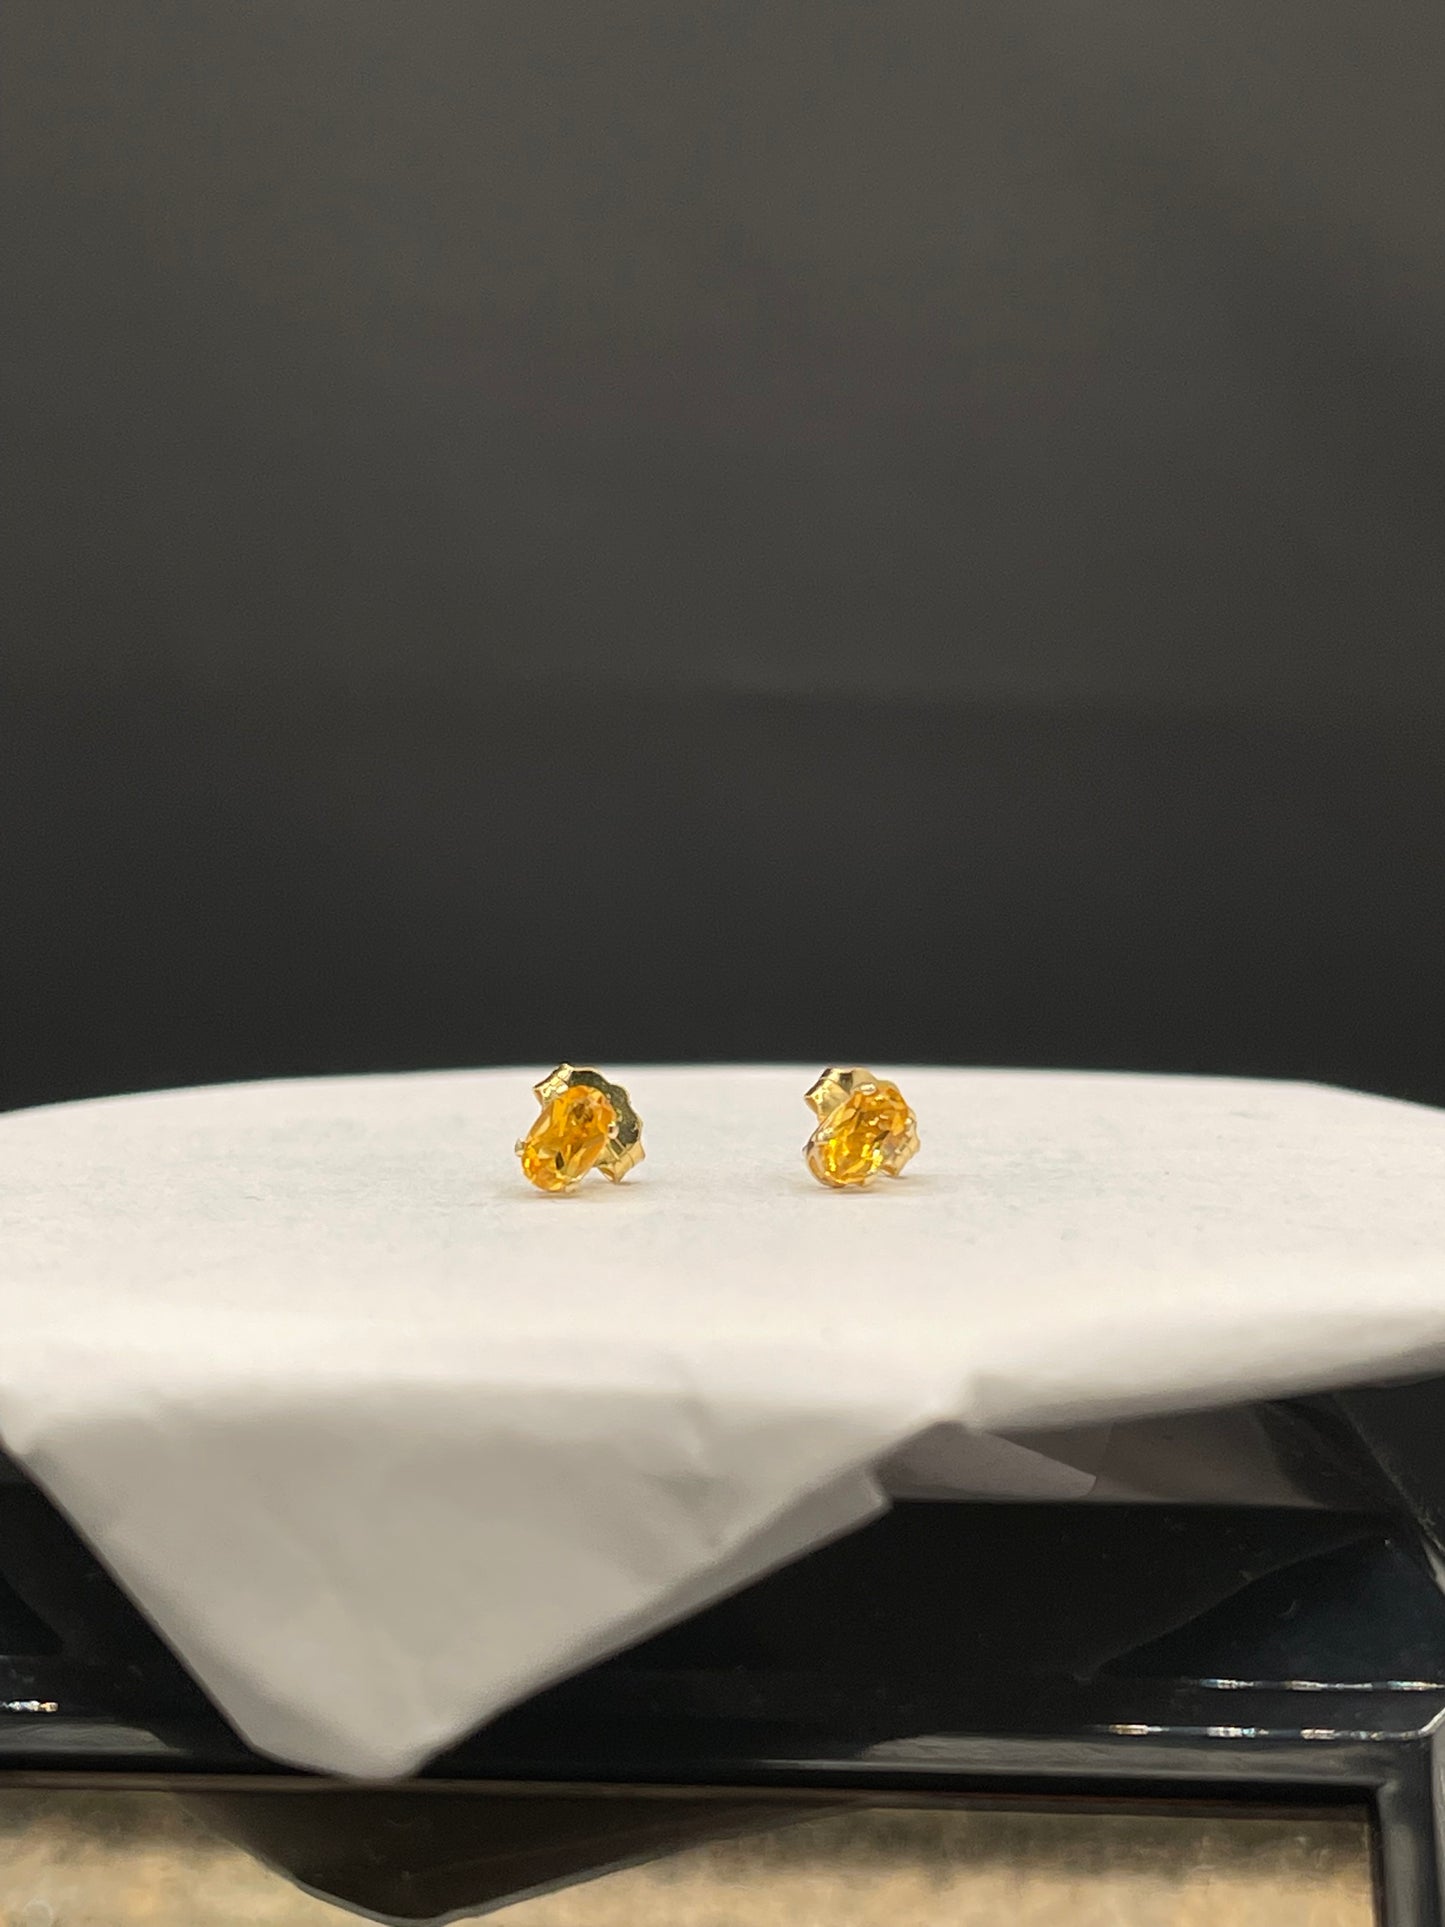 Natural Imperial Topaz 14k Yellow Gold Stud Earrings